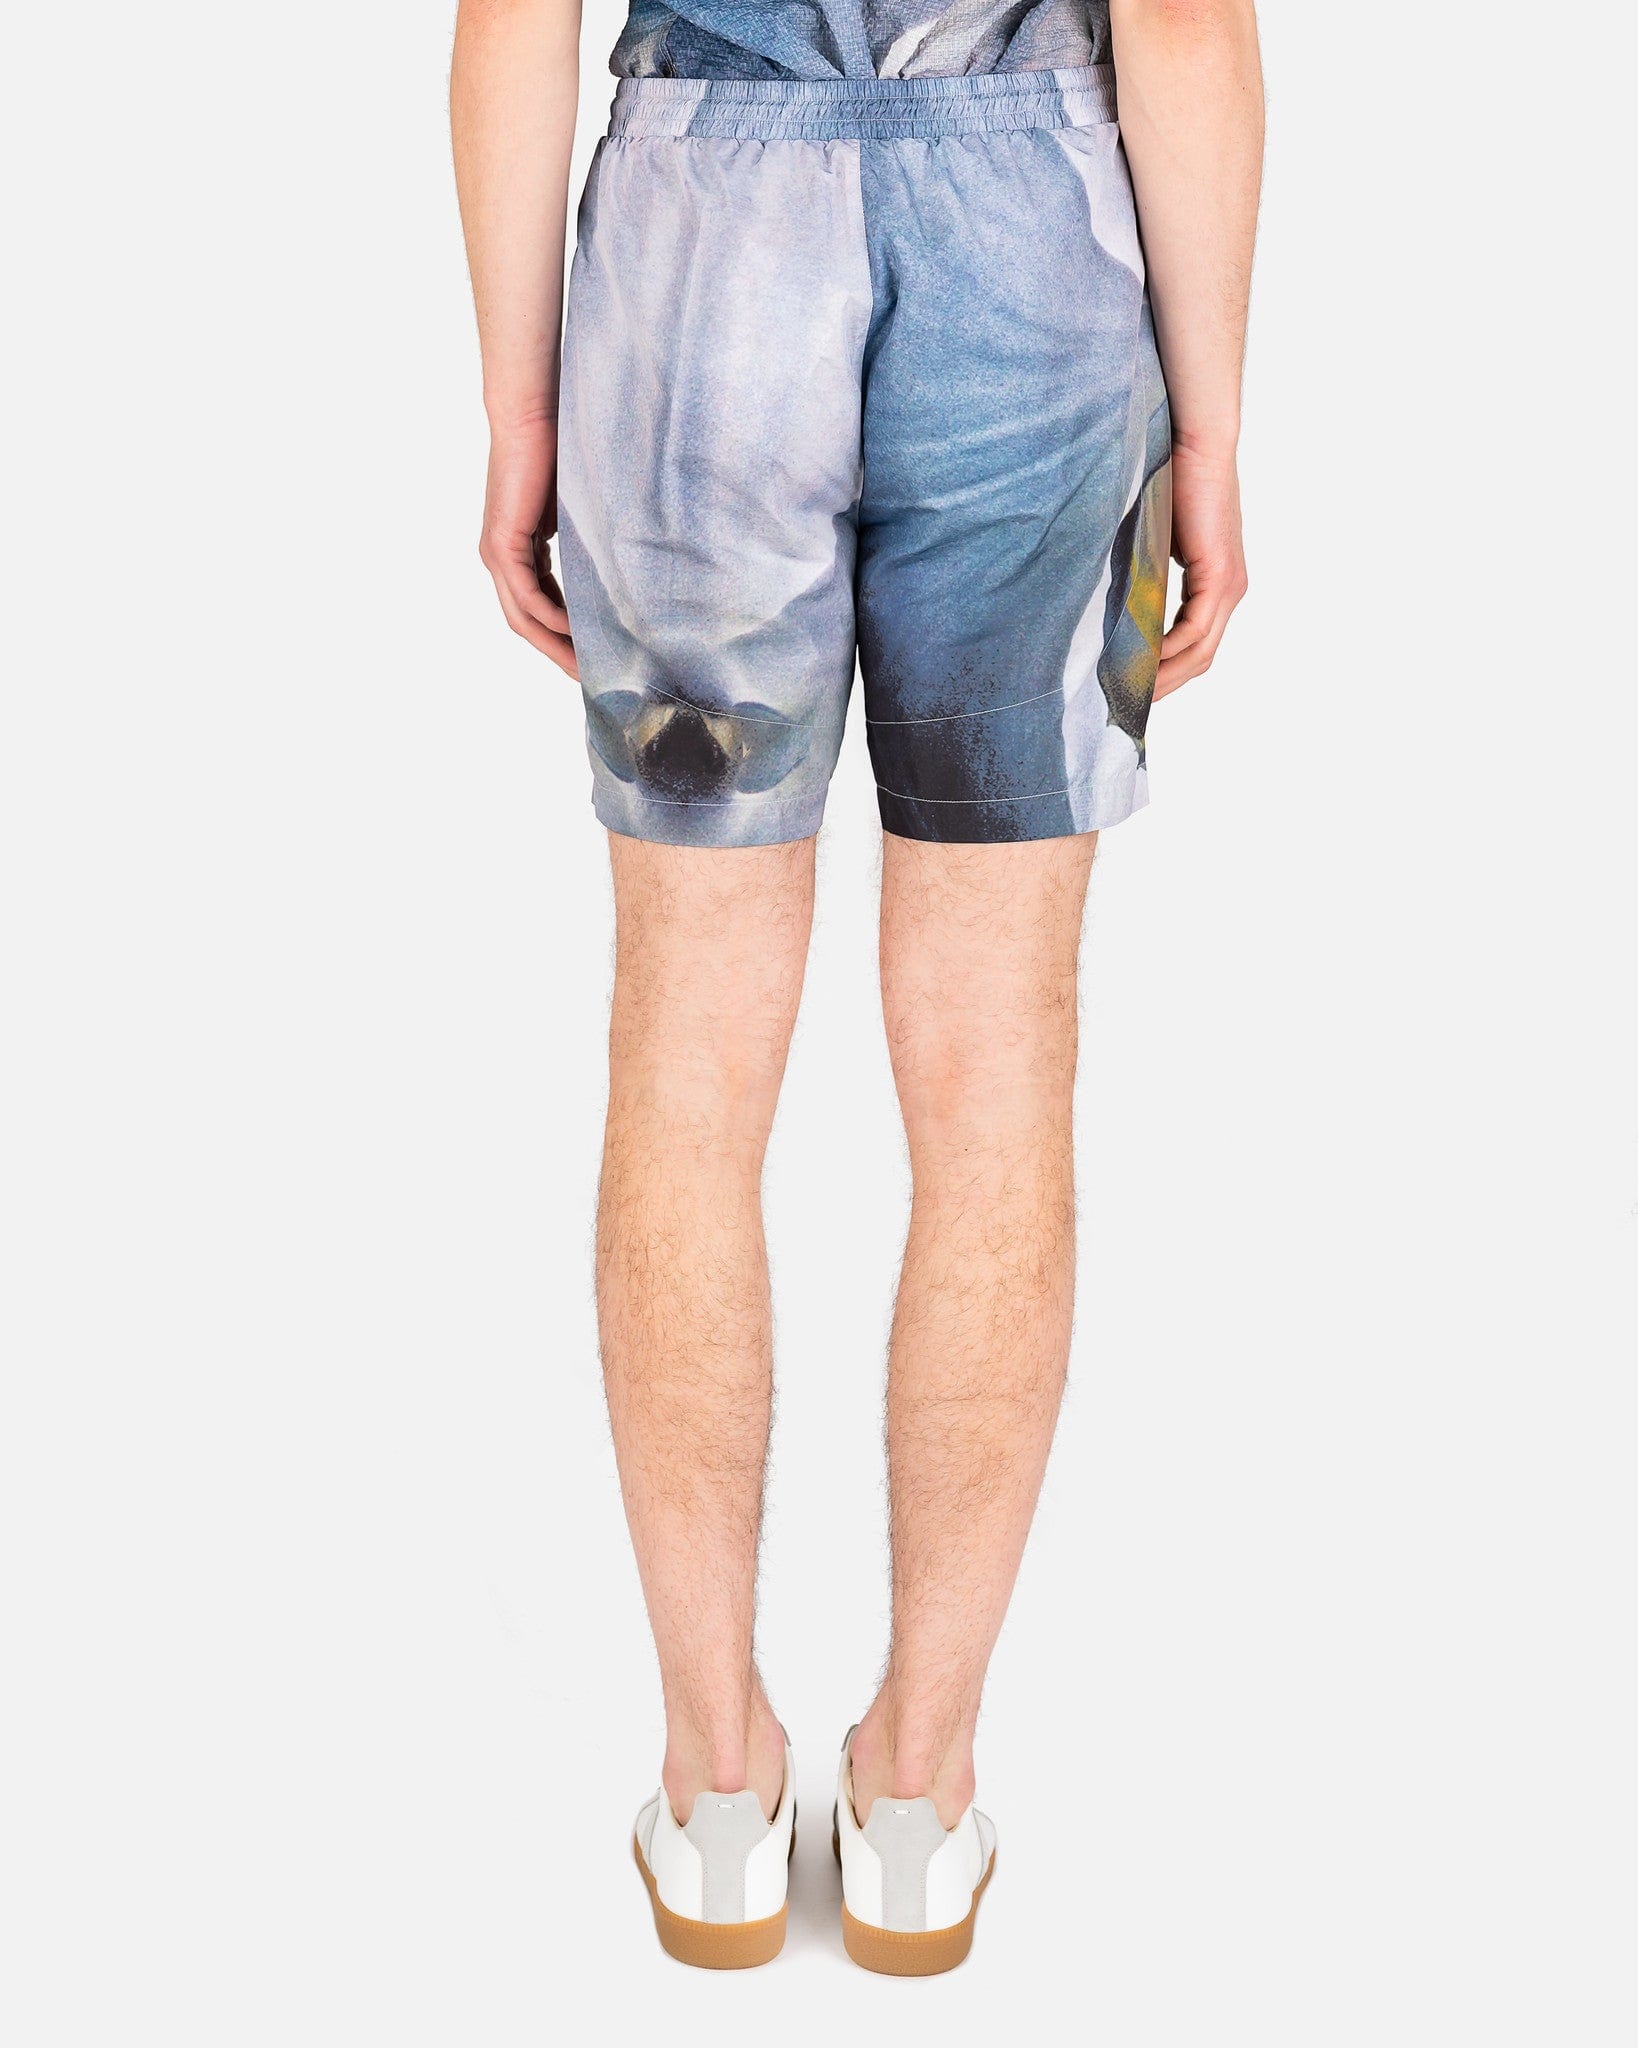 IISE Men's Shorts Track Shorts in Orchid Print